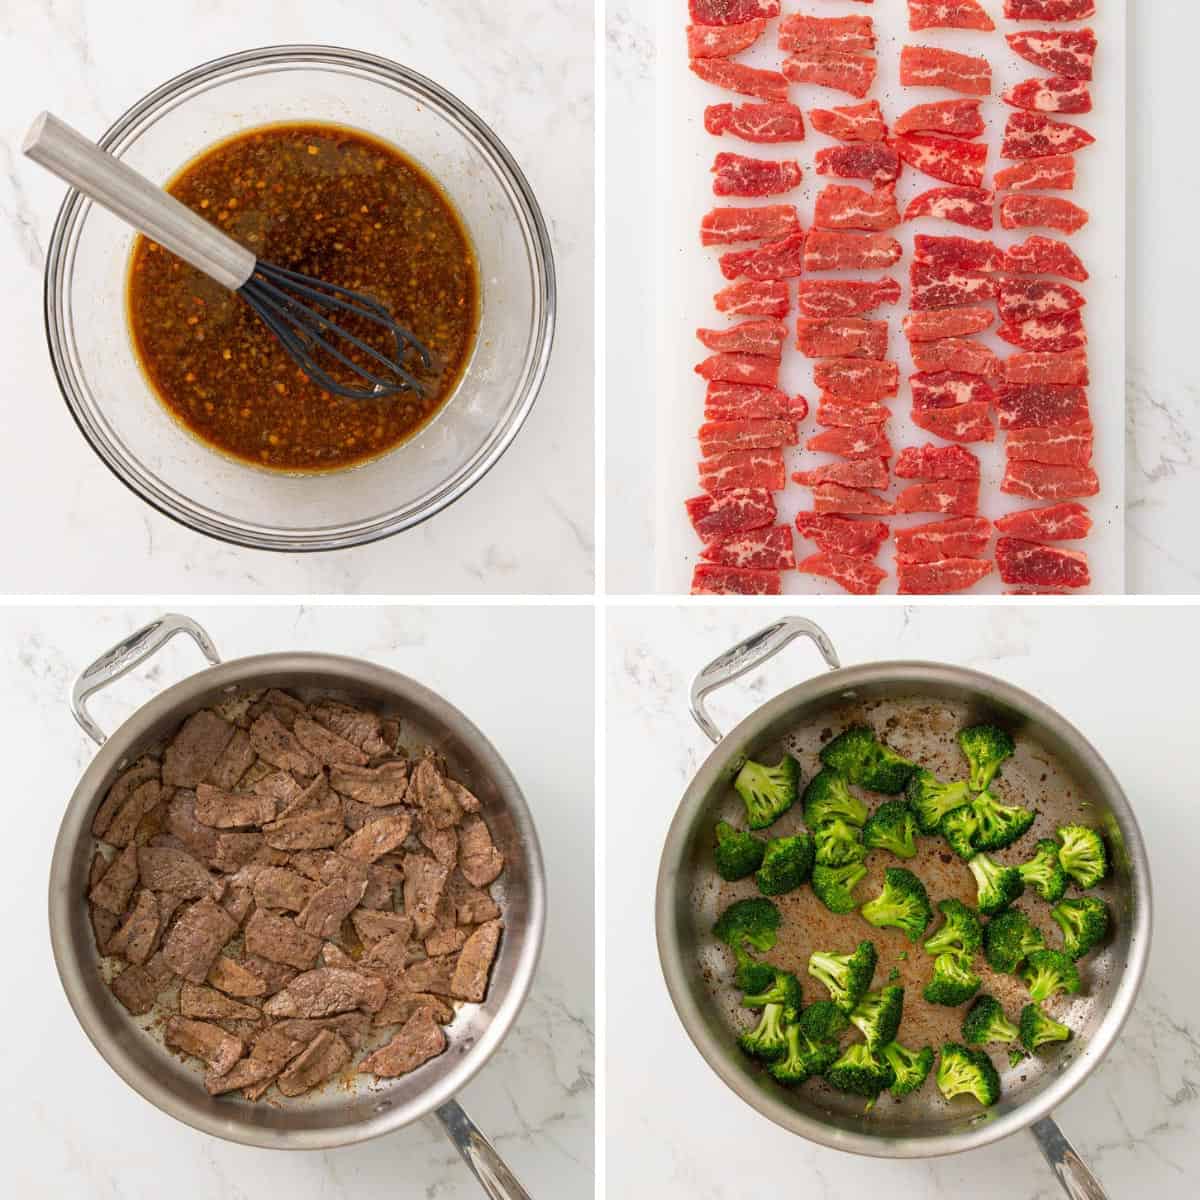 Steps showing how to make easy beef and broccoli stir-fry.